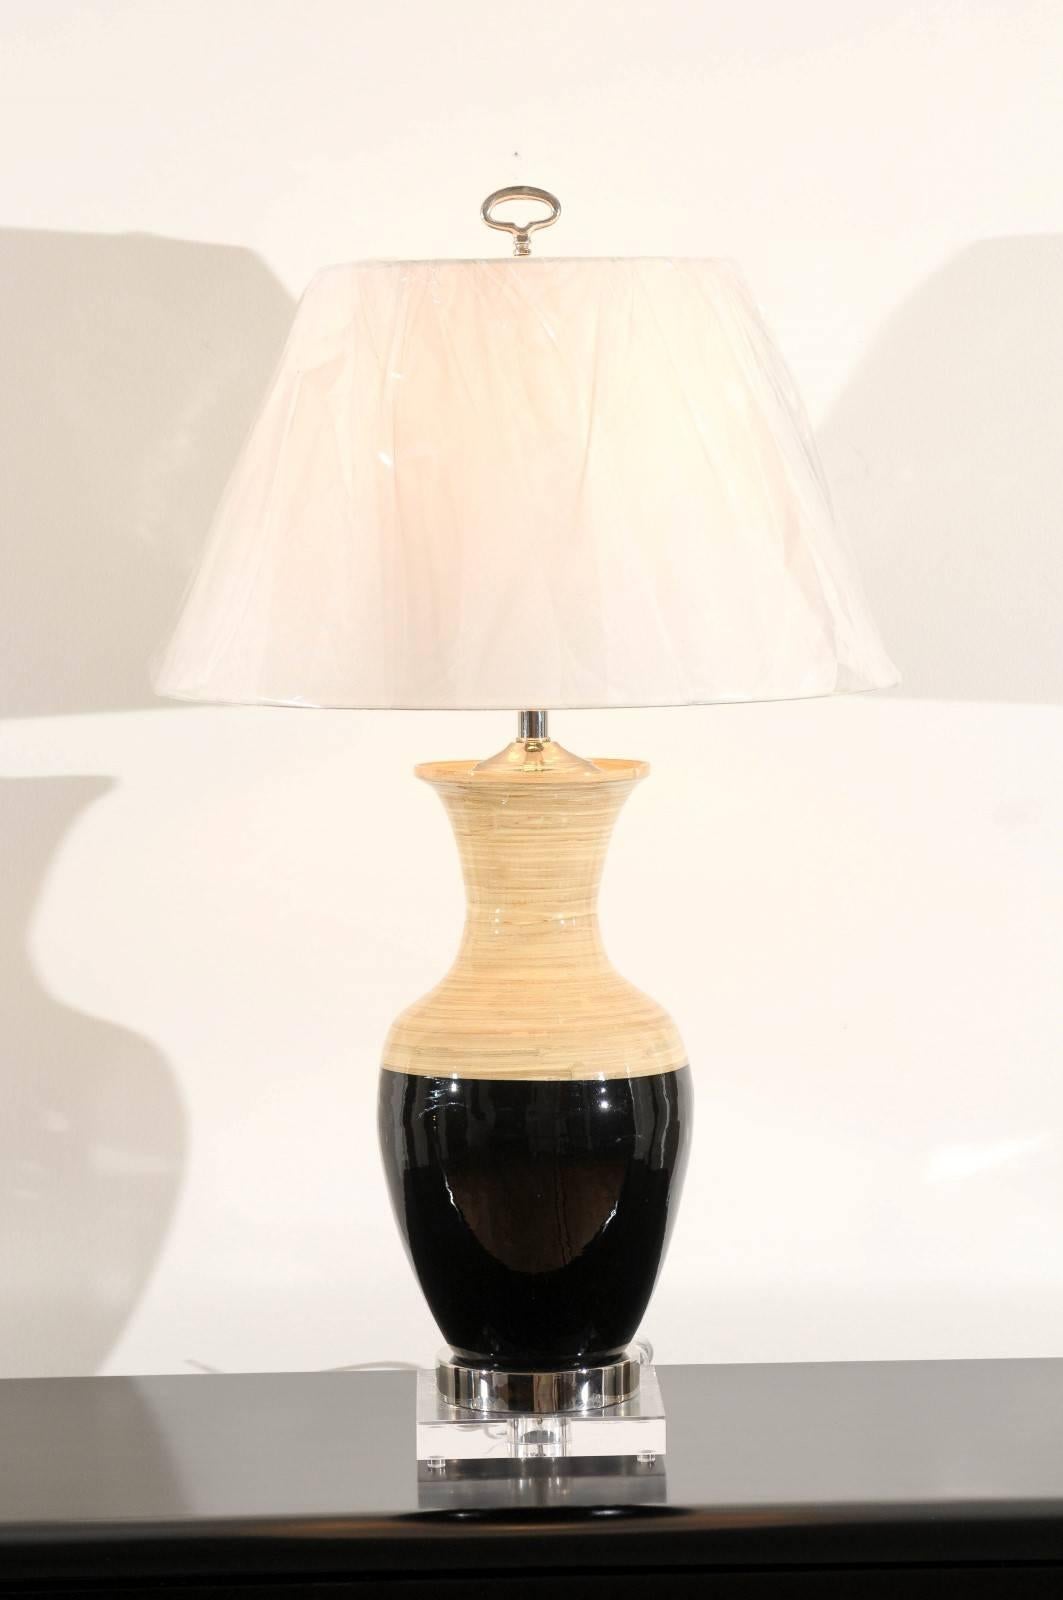 A stunning pair of architectural vessels as custom-made lamps. Beautiful spun bamboo form with black lacquer highlight. Accents in polished nickel and Lucite. Exceptional weight and quality. Exquisite Jewelry! Excellent Restored Condition. Wired